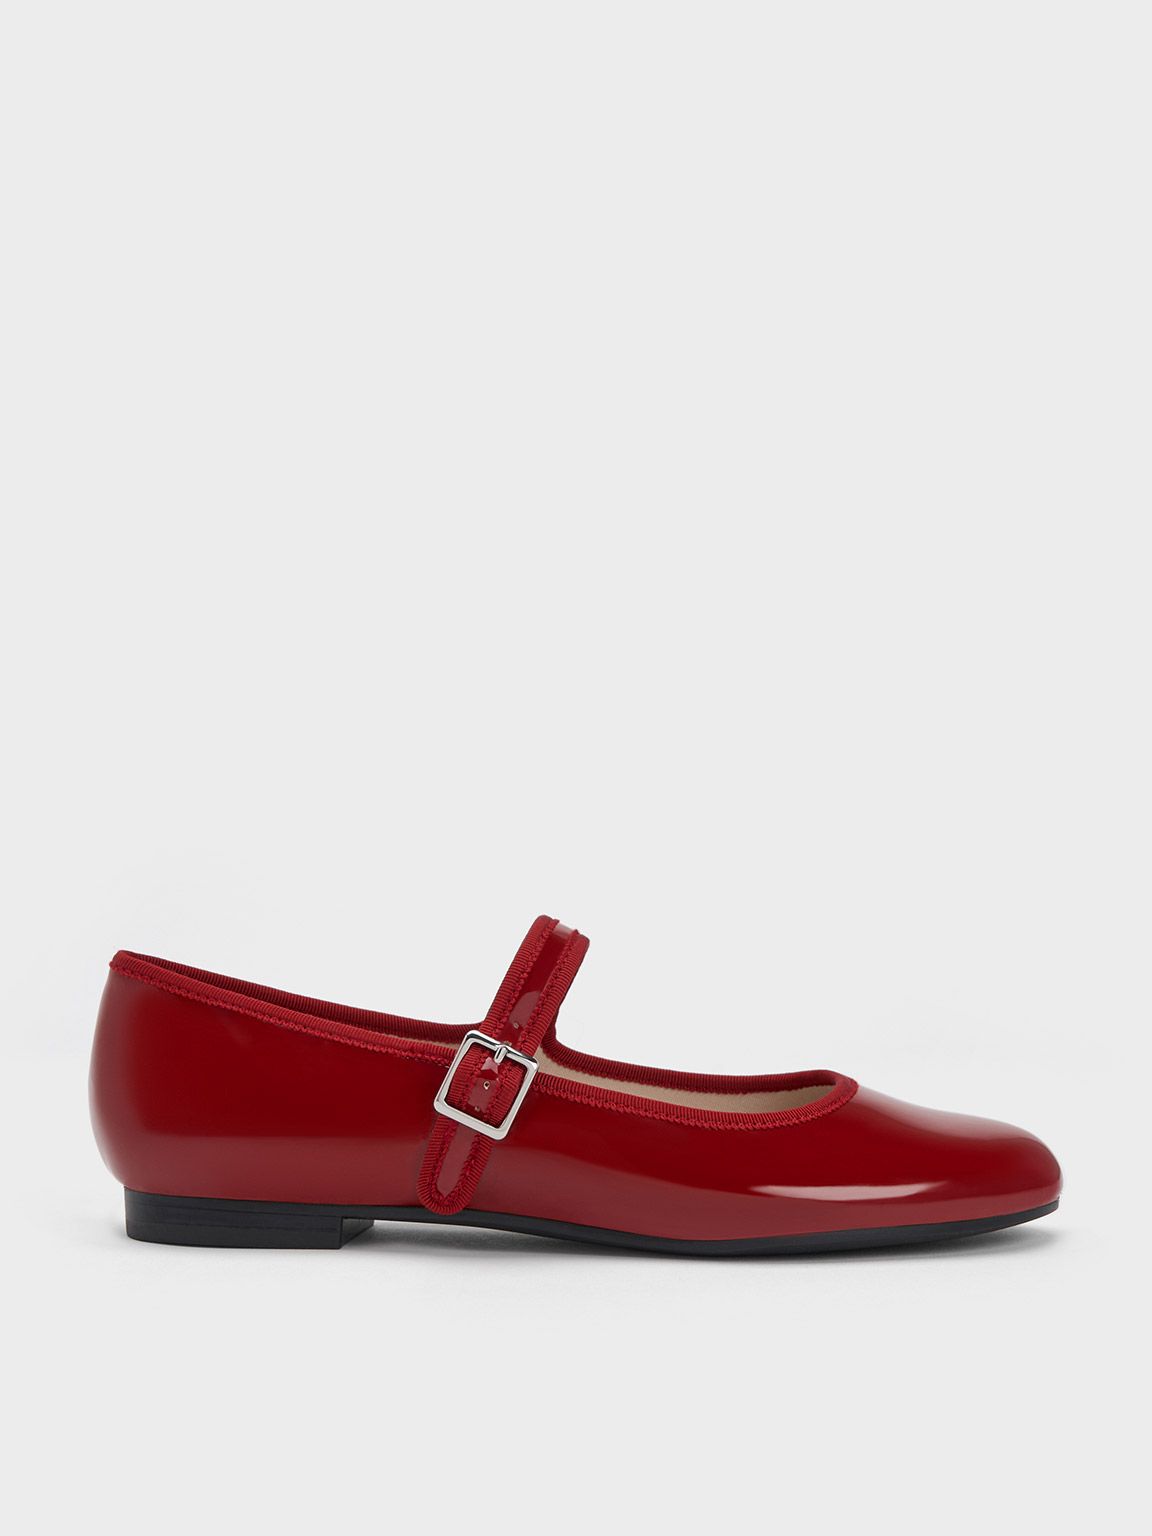 Red Patent Buckled Mary Jane Flats | CHARLES & KEITH UK | Charles & Keith UK